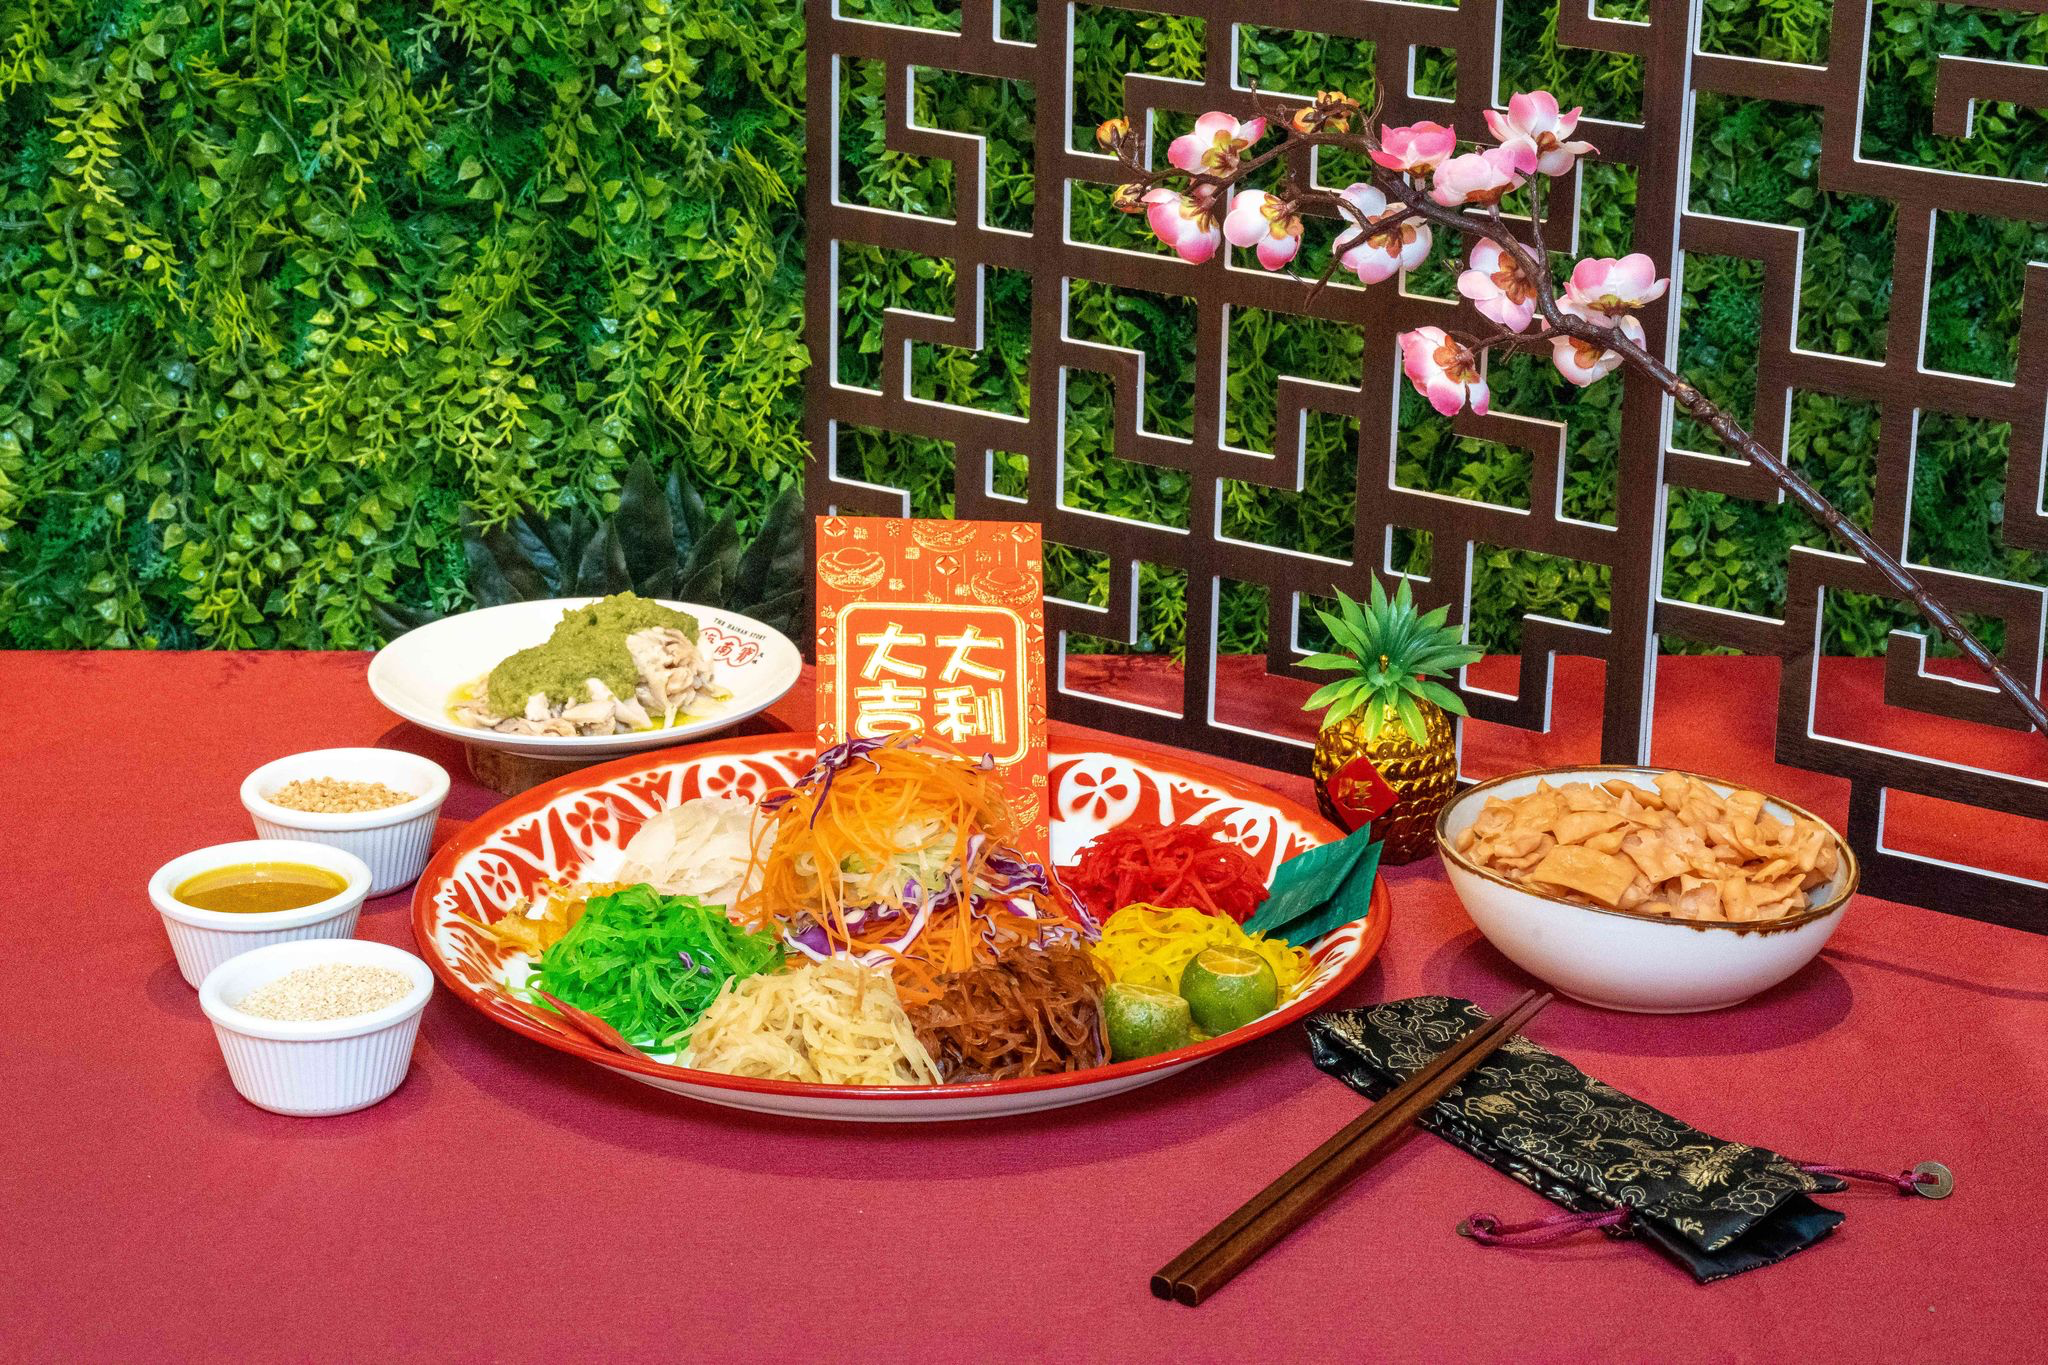 Lobang: MORE THAN 50 CNY 2023 F&B Deals - Your one stop guide to Yusheng, Pen Cai, Set Menus and more this Lunar New Year! - 19